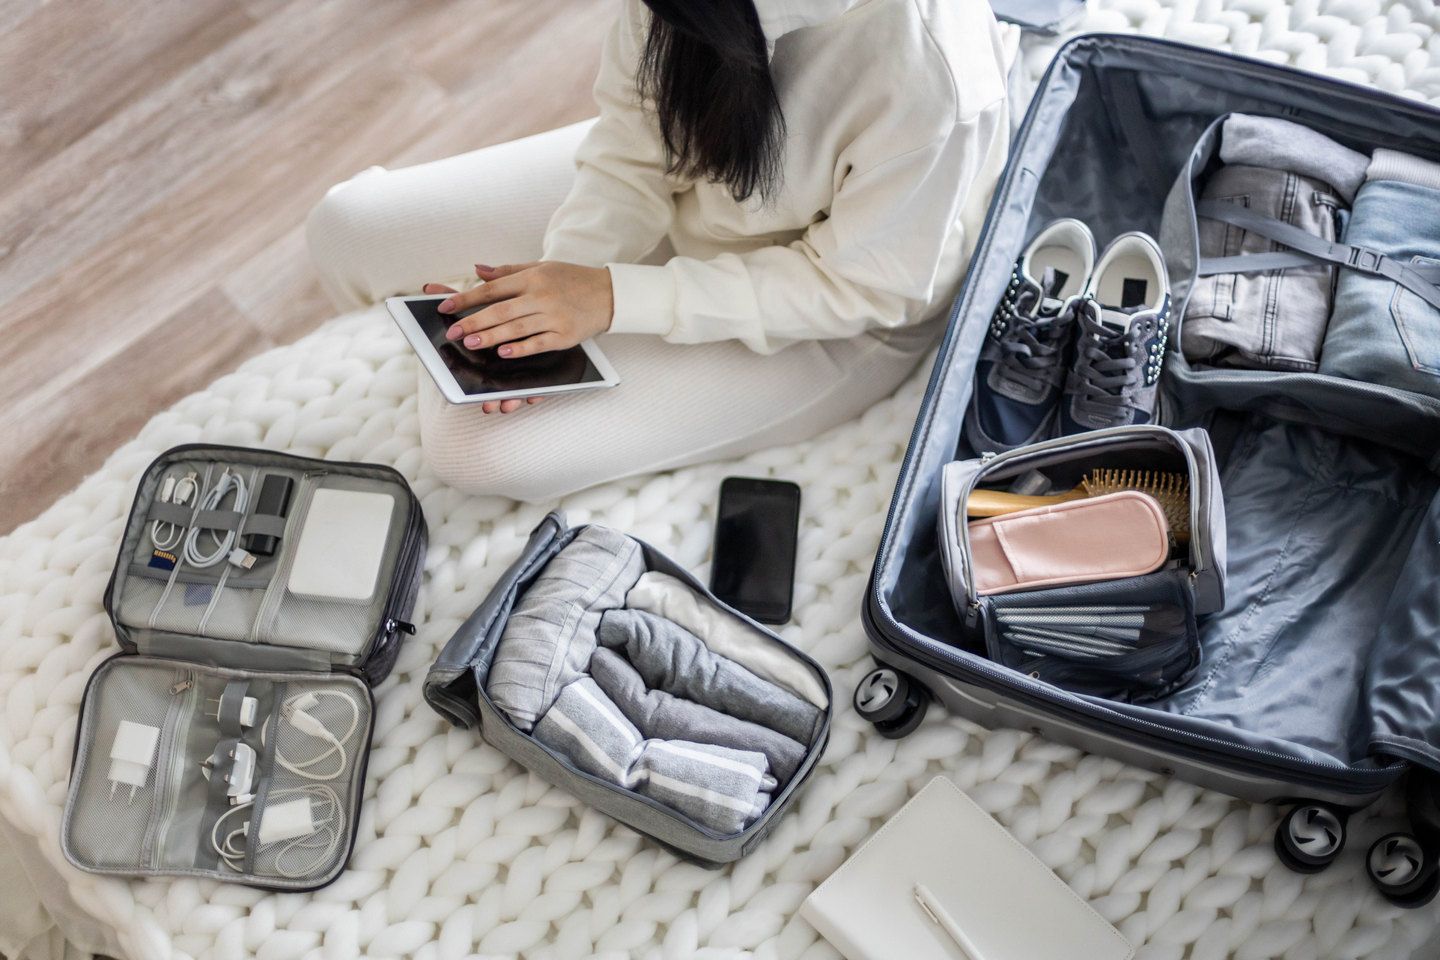 Cosmetics for travel - which ones are worth choosing? – main image